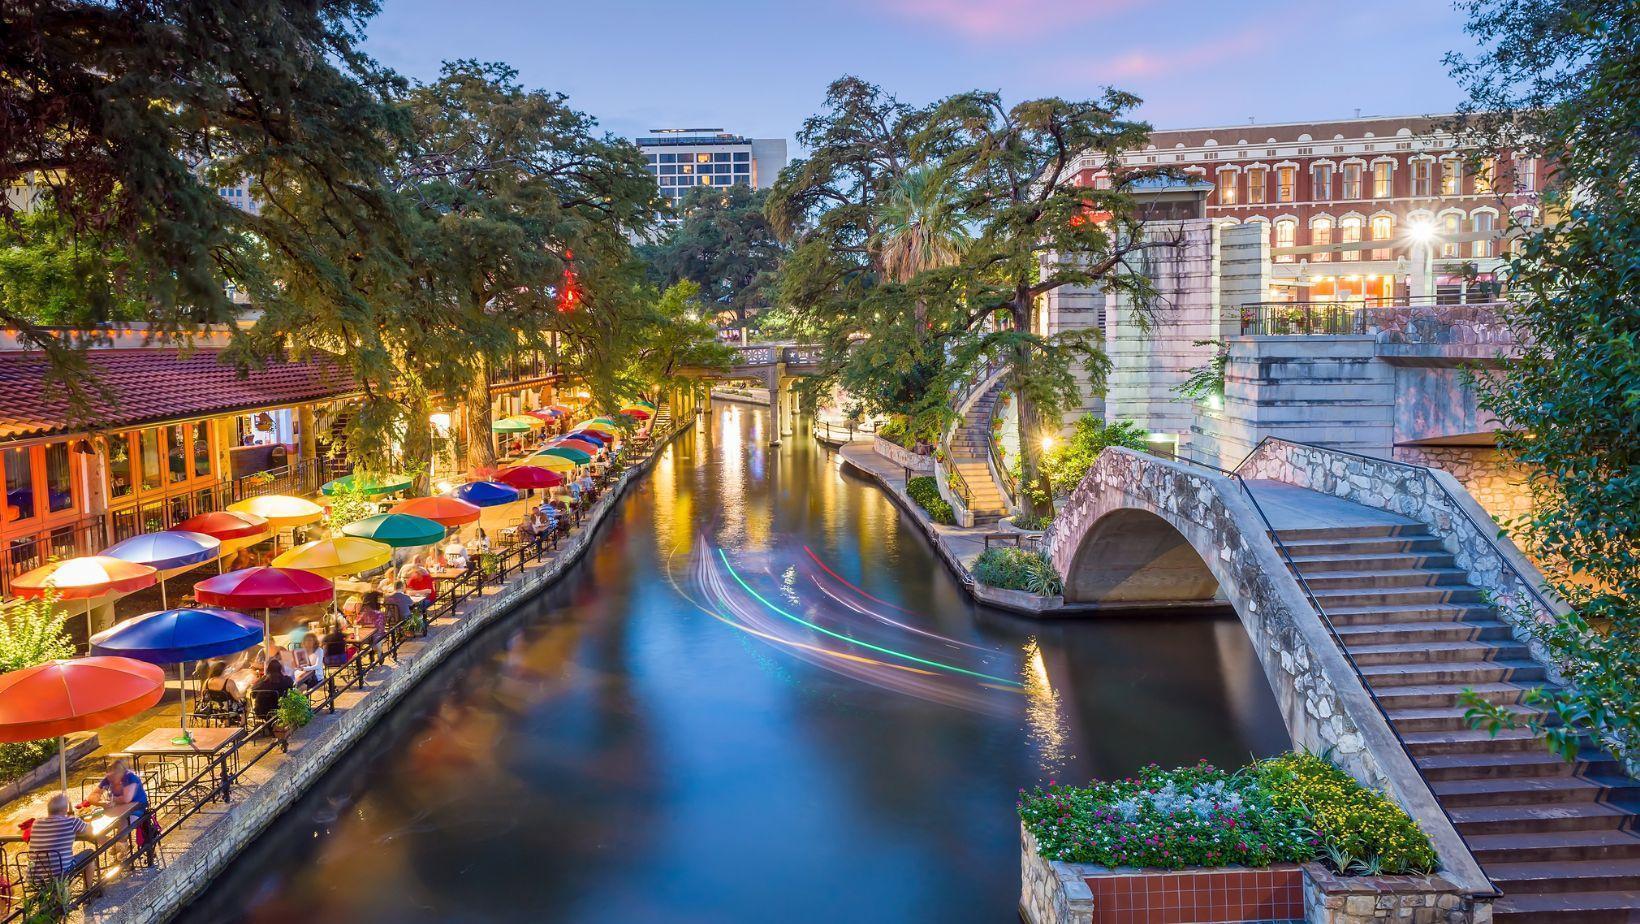 Travel Guide to San Antonio River Walk: How to Get There, Opening and Closing Times, Booking Options!